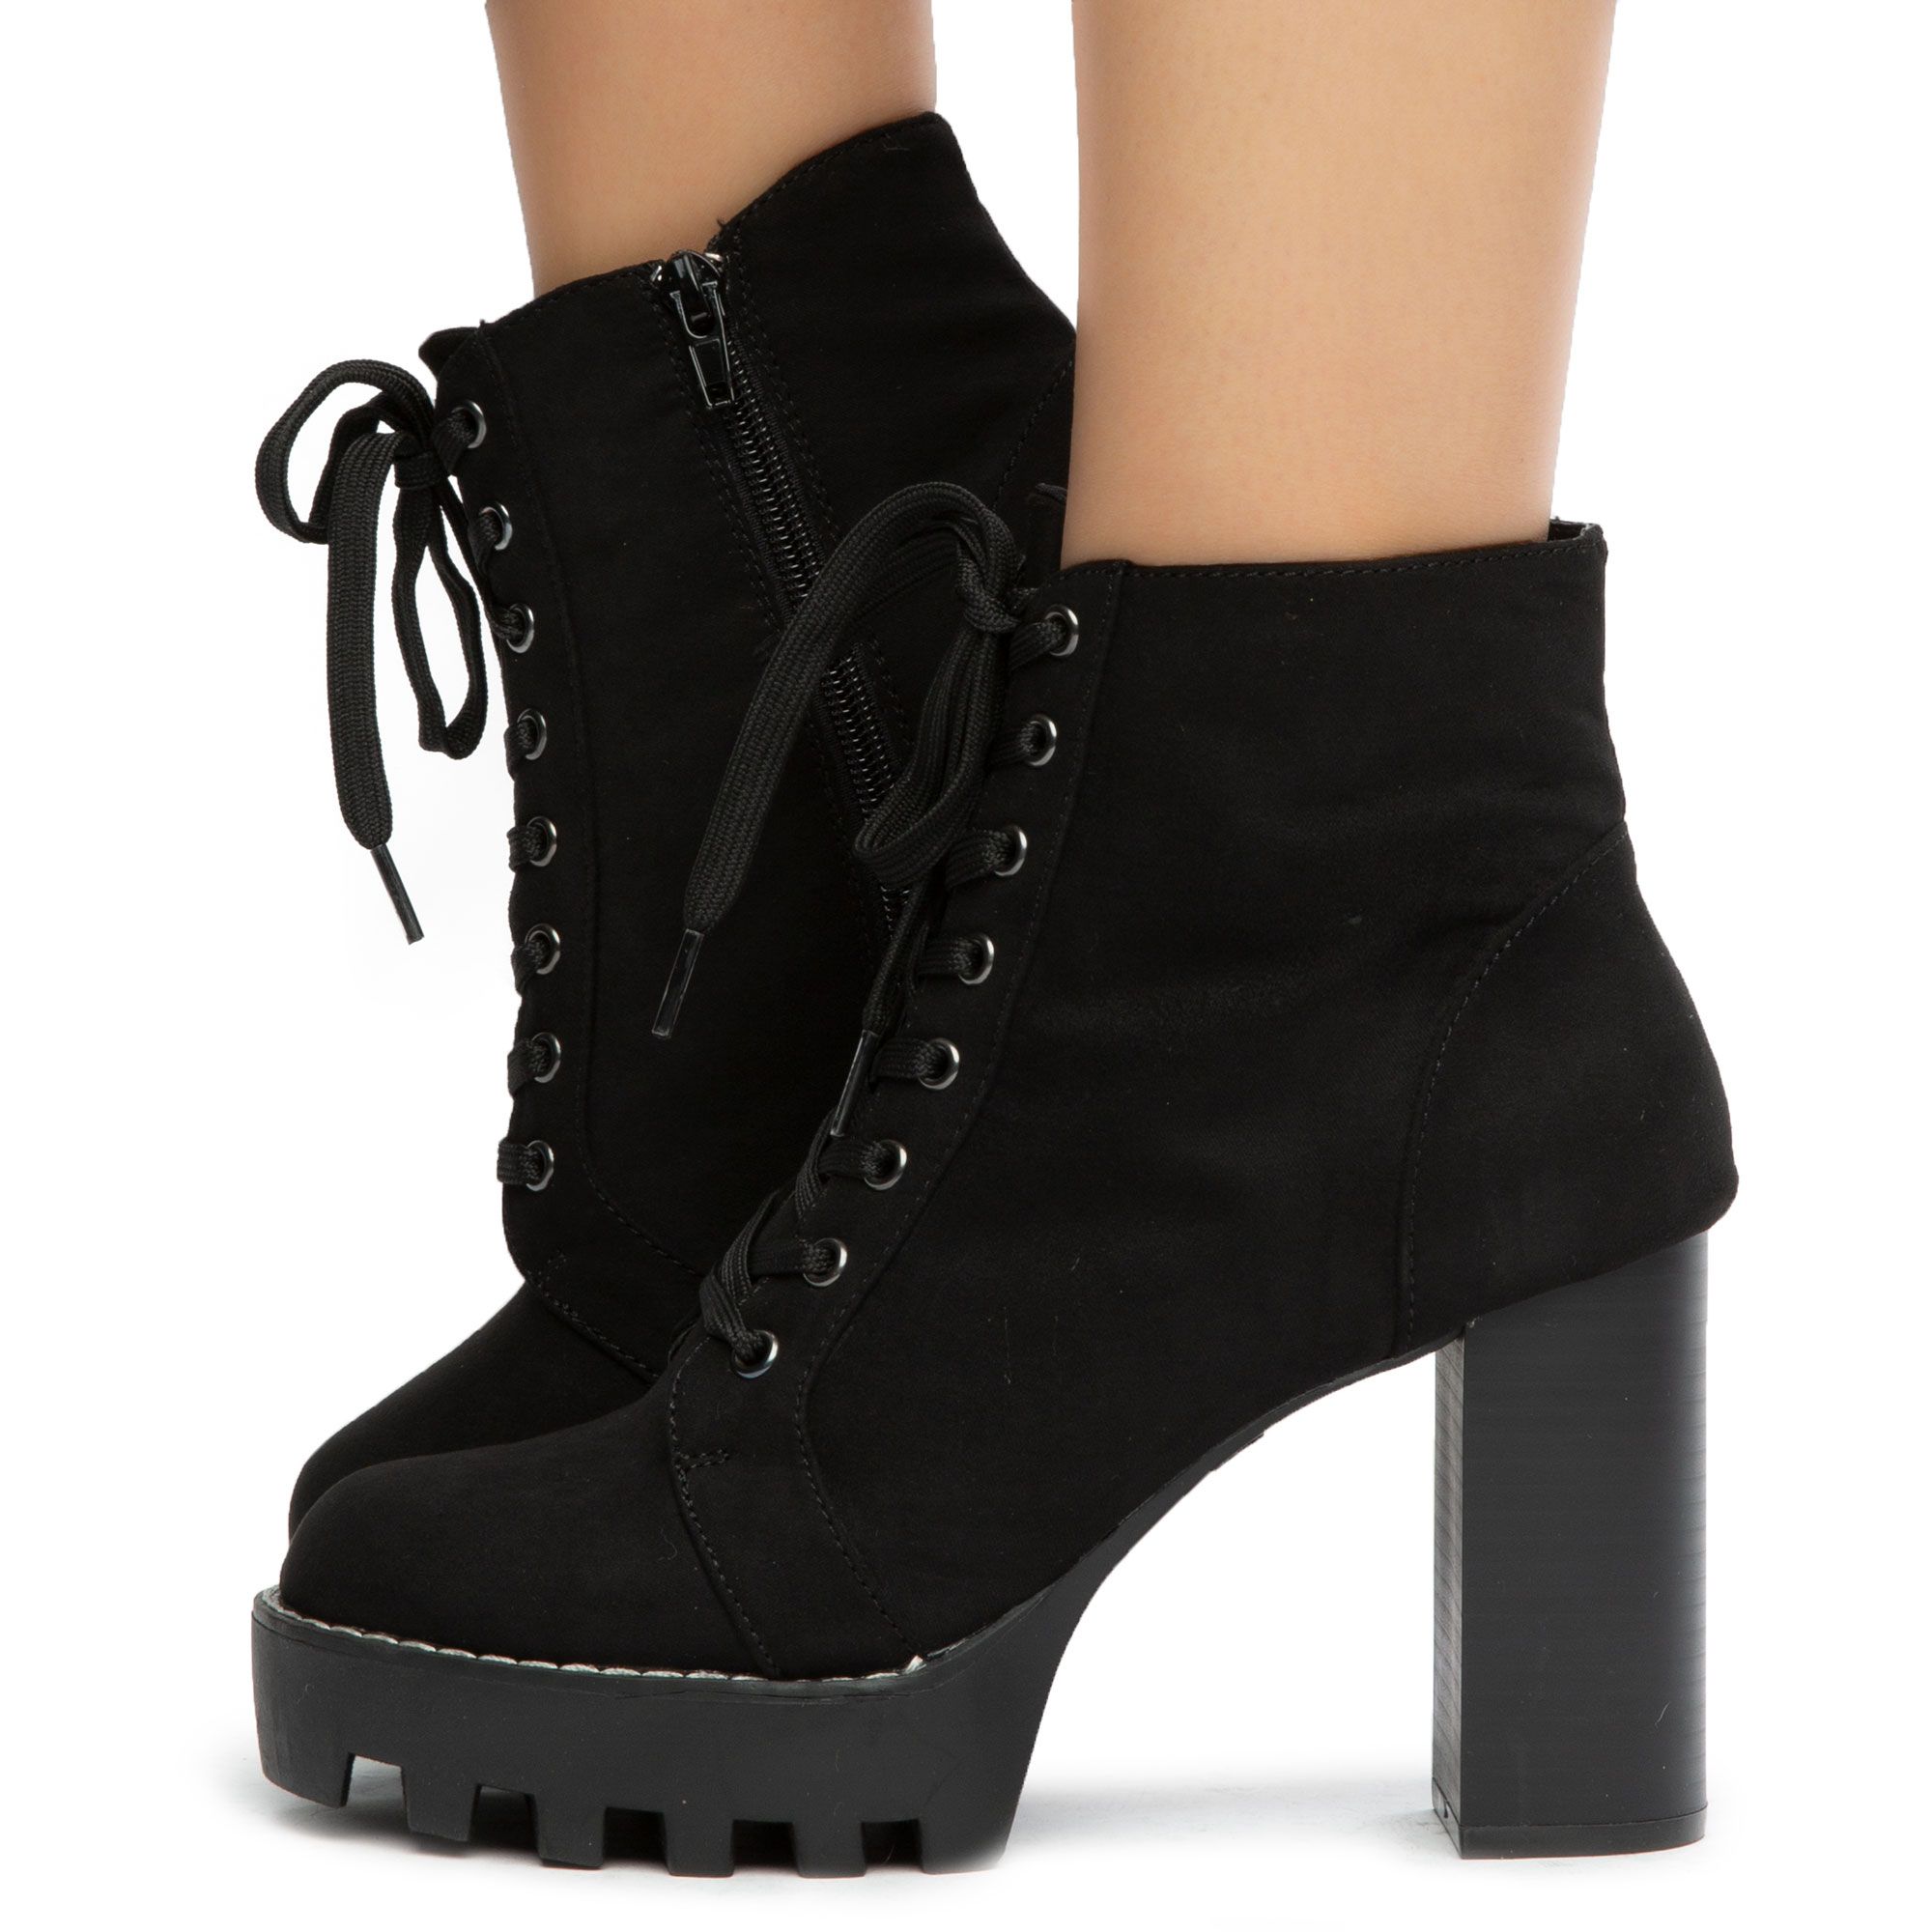 Intensity-04 Lace-Up Chunky Booties